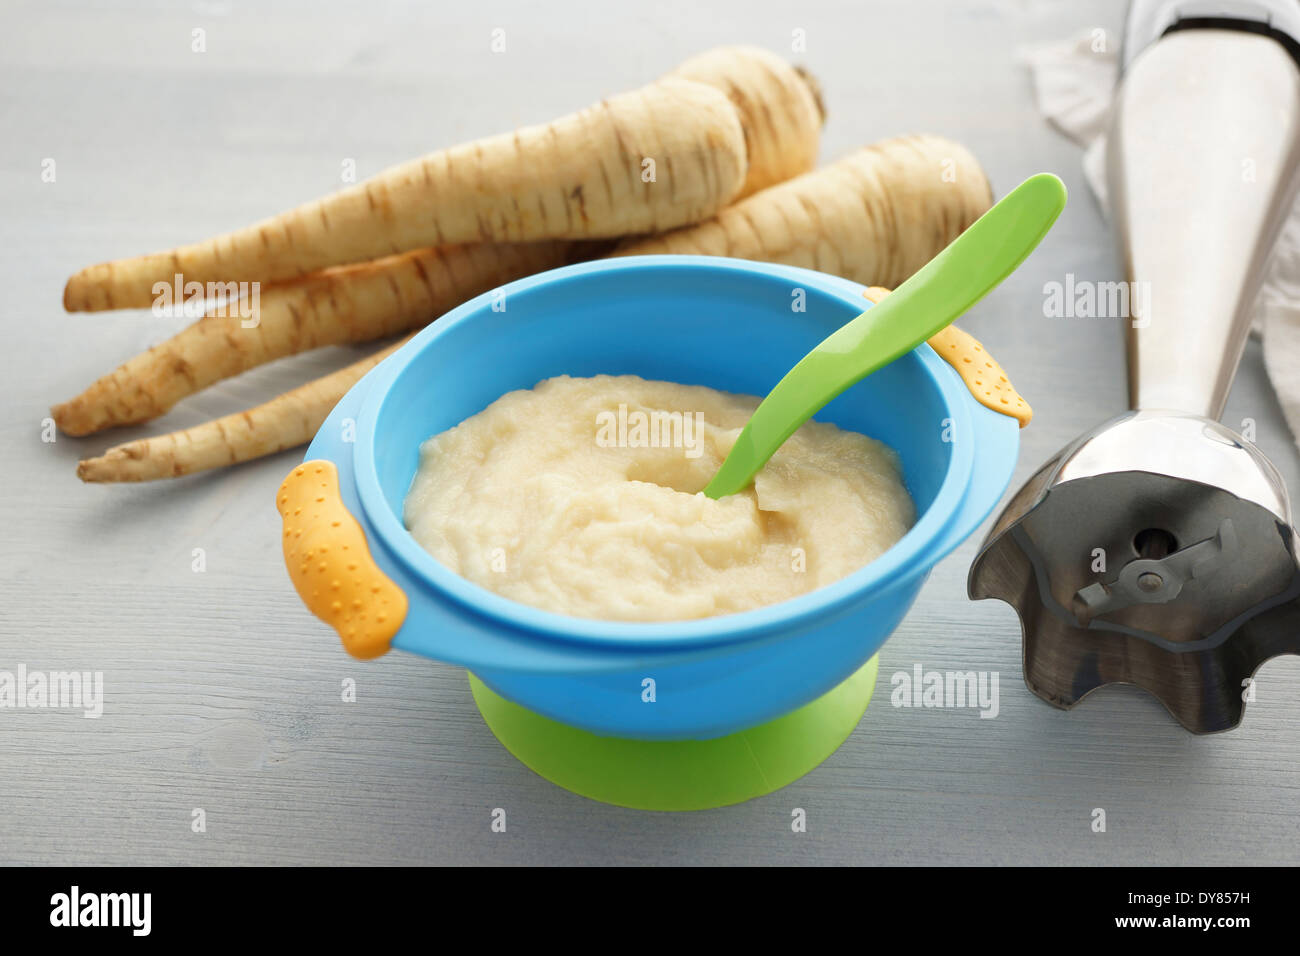 https://c8.alamy.com/comp/DY857H/immersion-blender-bowl-of-parsnip-puree-and-parsnips-on-wooden-table-DY857H.jpg